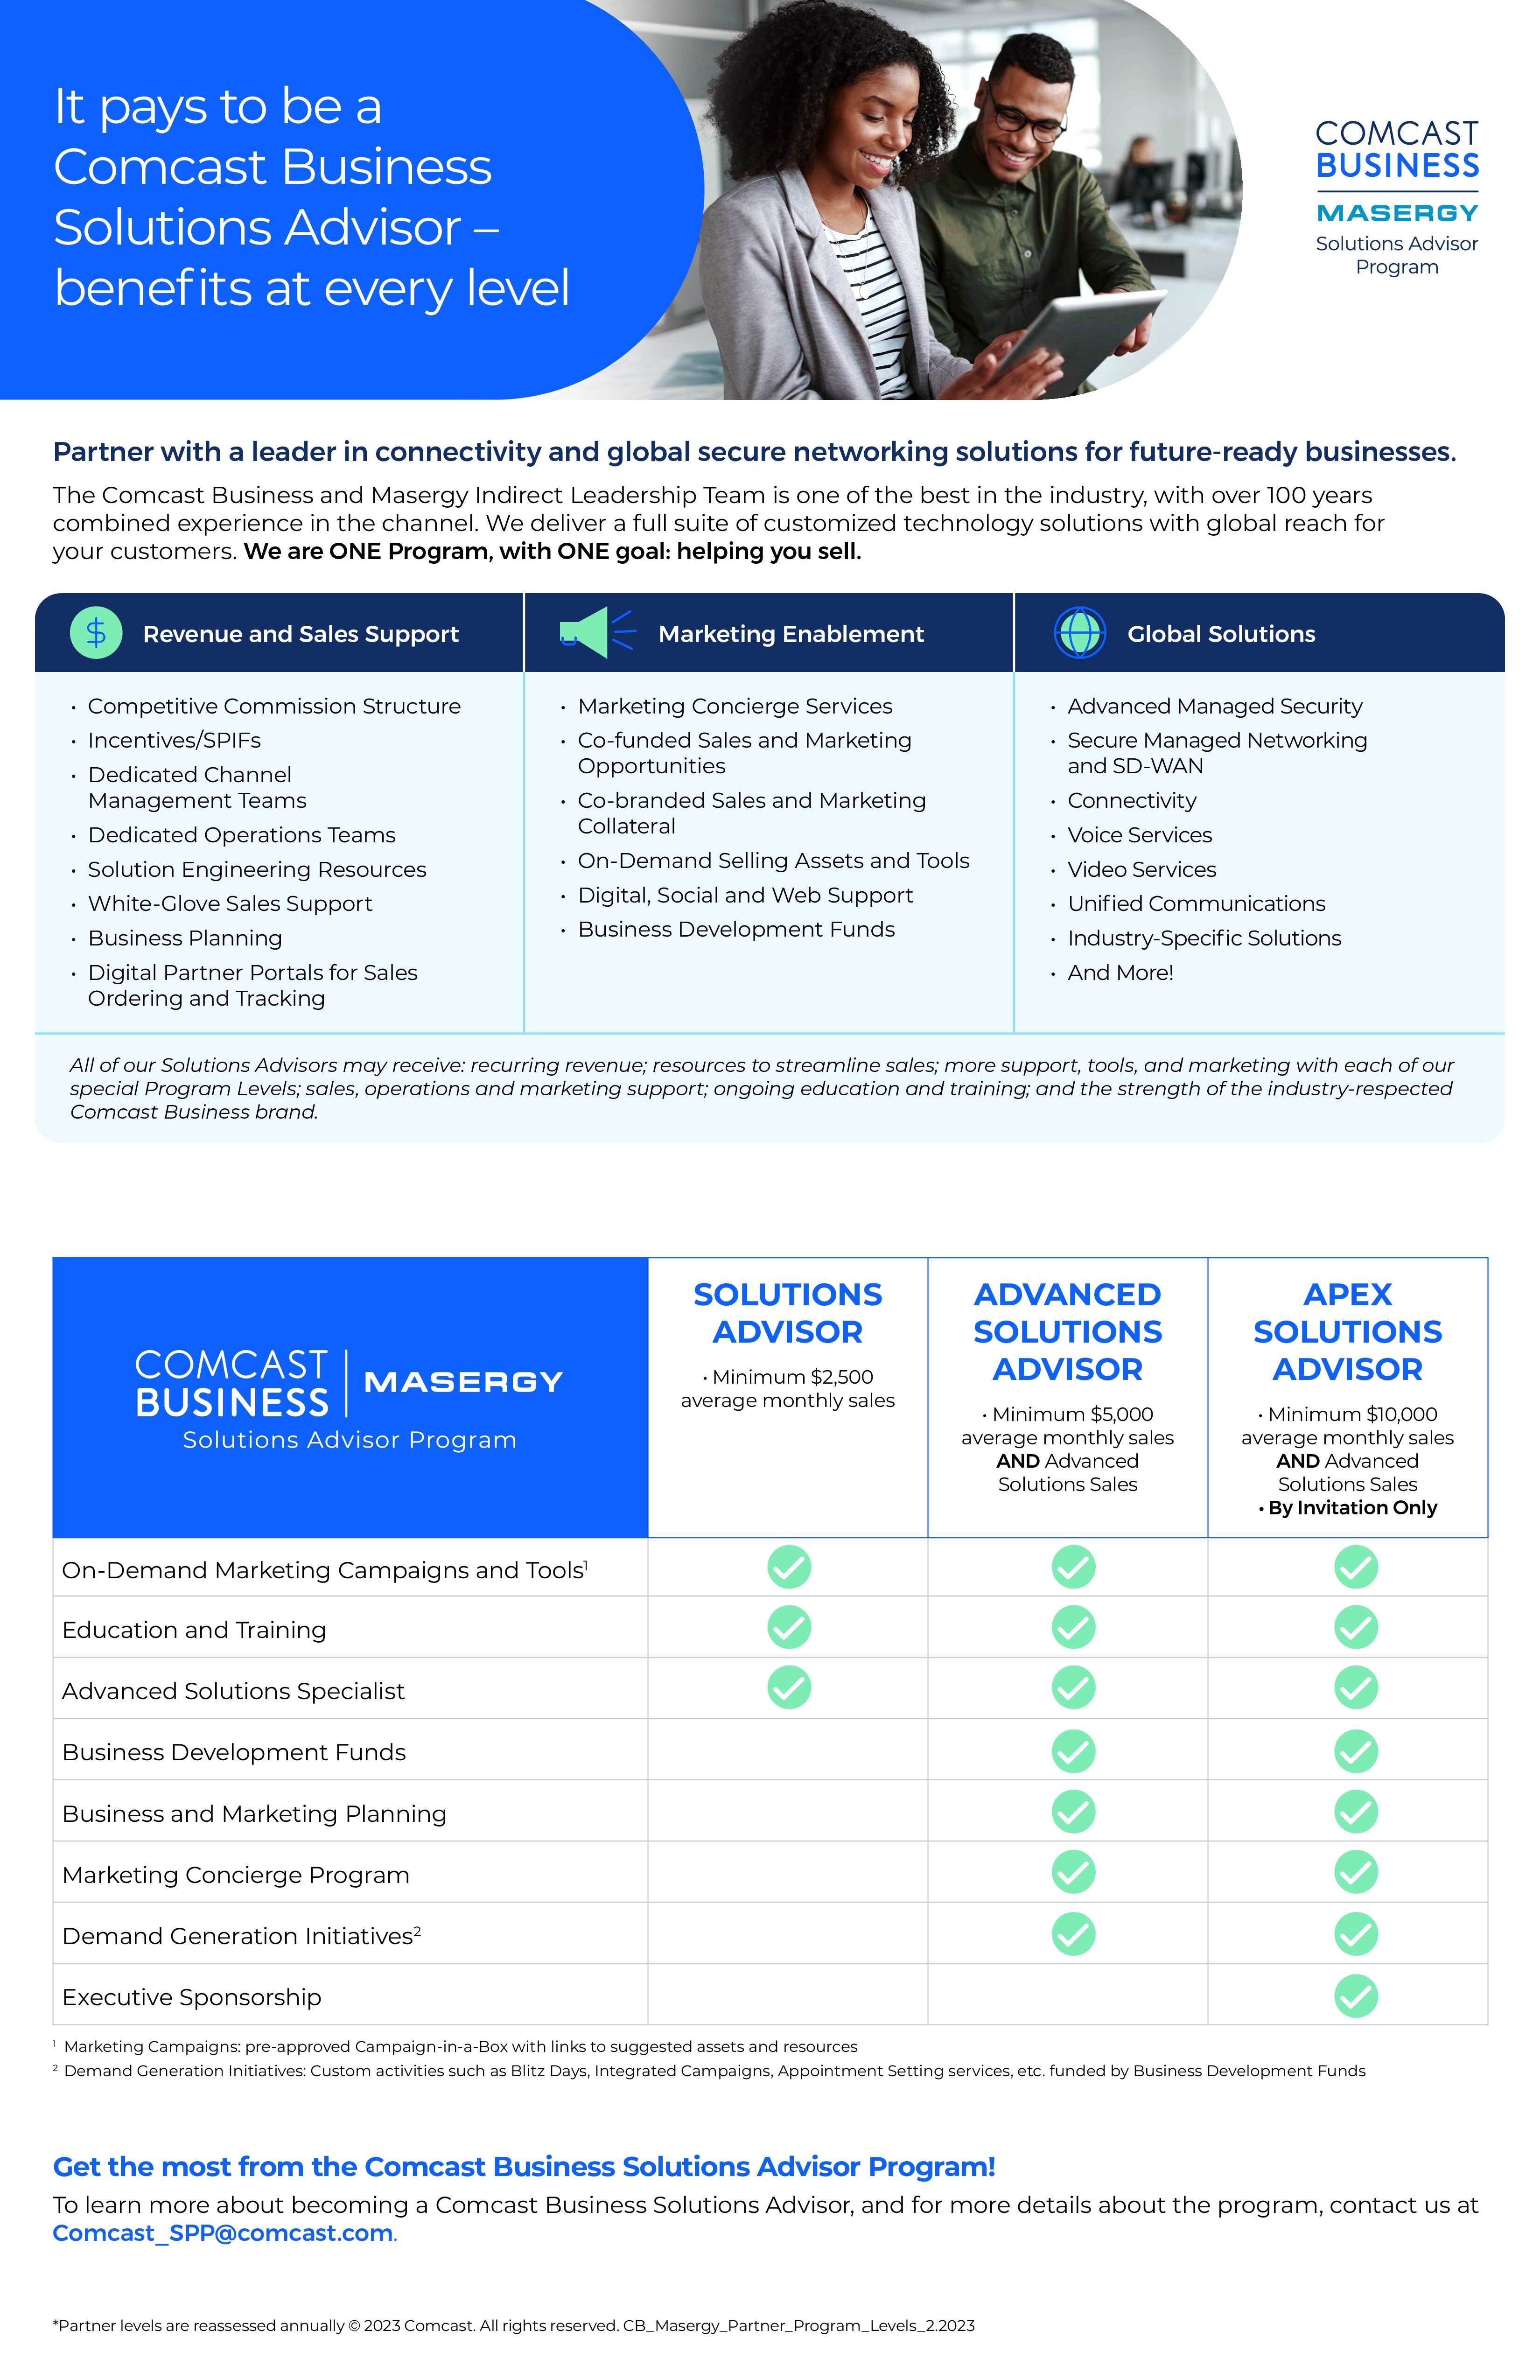 Infographic: Comcast Business Solutions Advisor Program Levels and Benefits